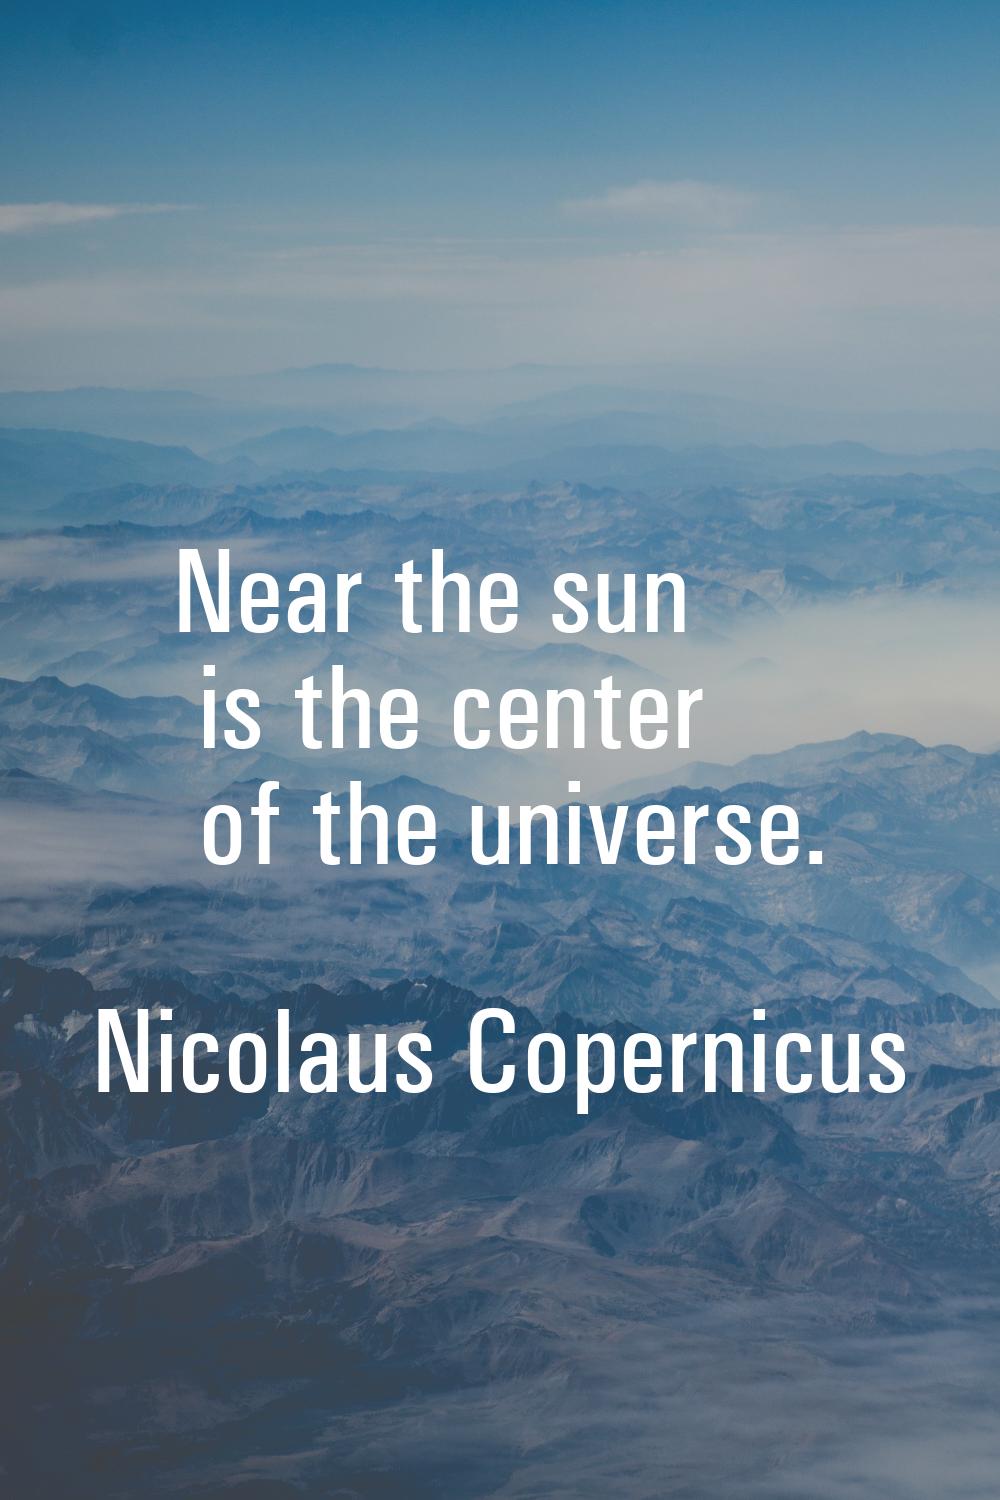 Near the sun is the center of the universe.